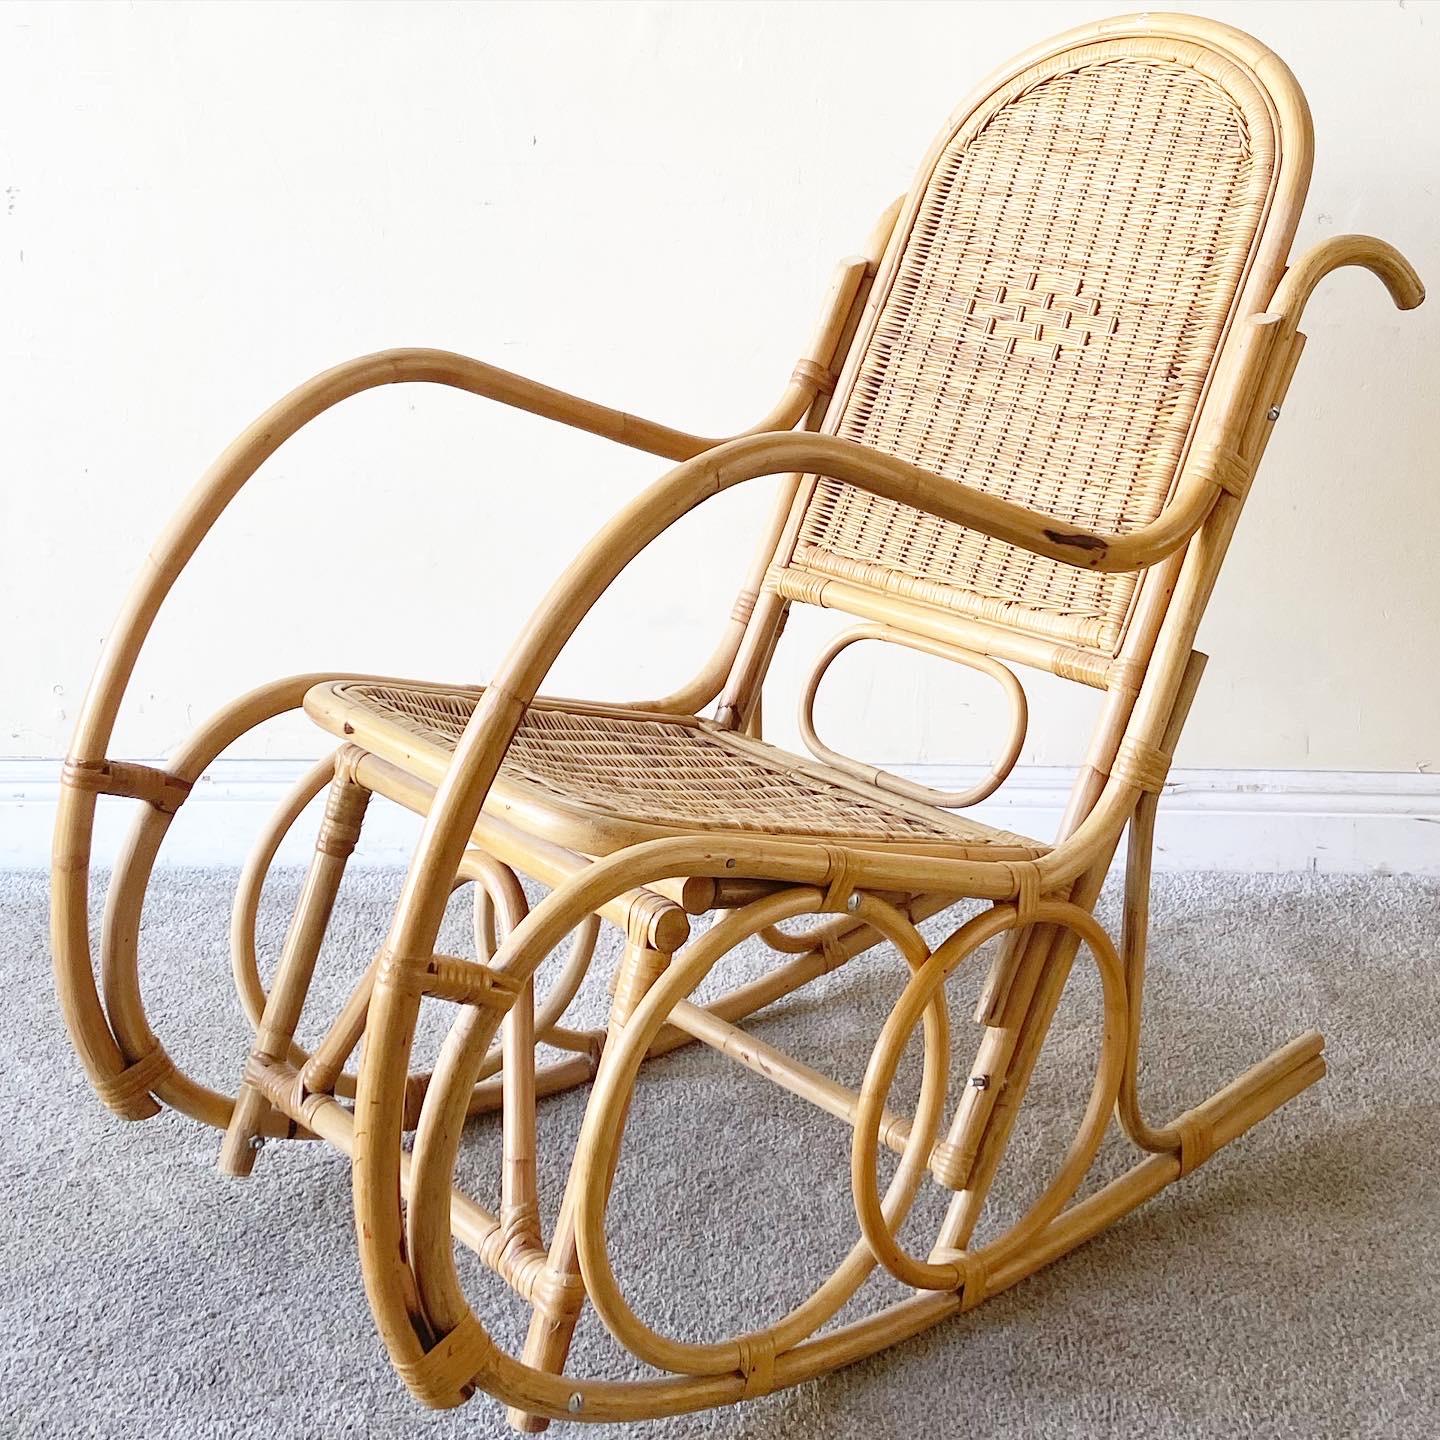 Amazing bamboo wicker rocking chair.

Additional Information:
Material: Bamboo, Rattan, Wicker
Color: Brown
Style: Boho Chic
Time Period: 1980s
Place of origin: Taiwan
Dimension: 20.5ʺ W × 36ʺ D × 37.5ʺ H